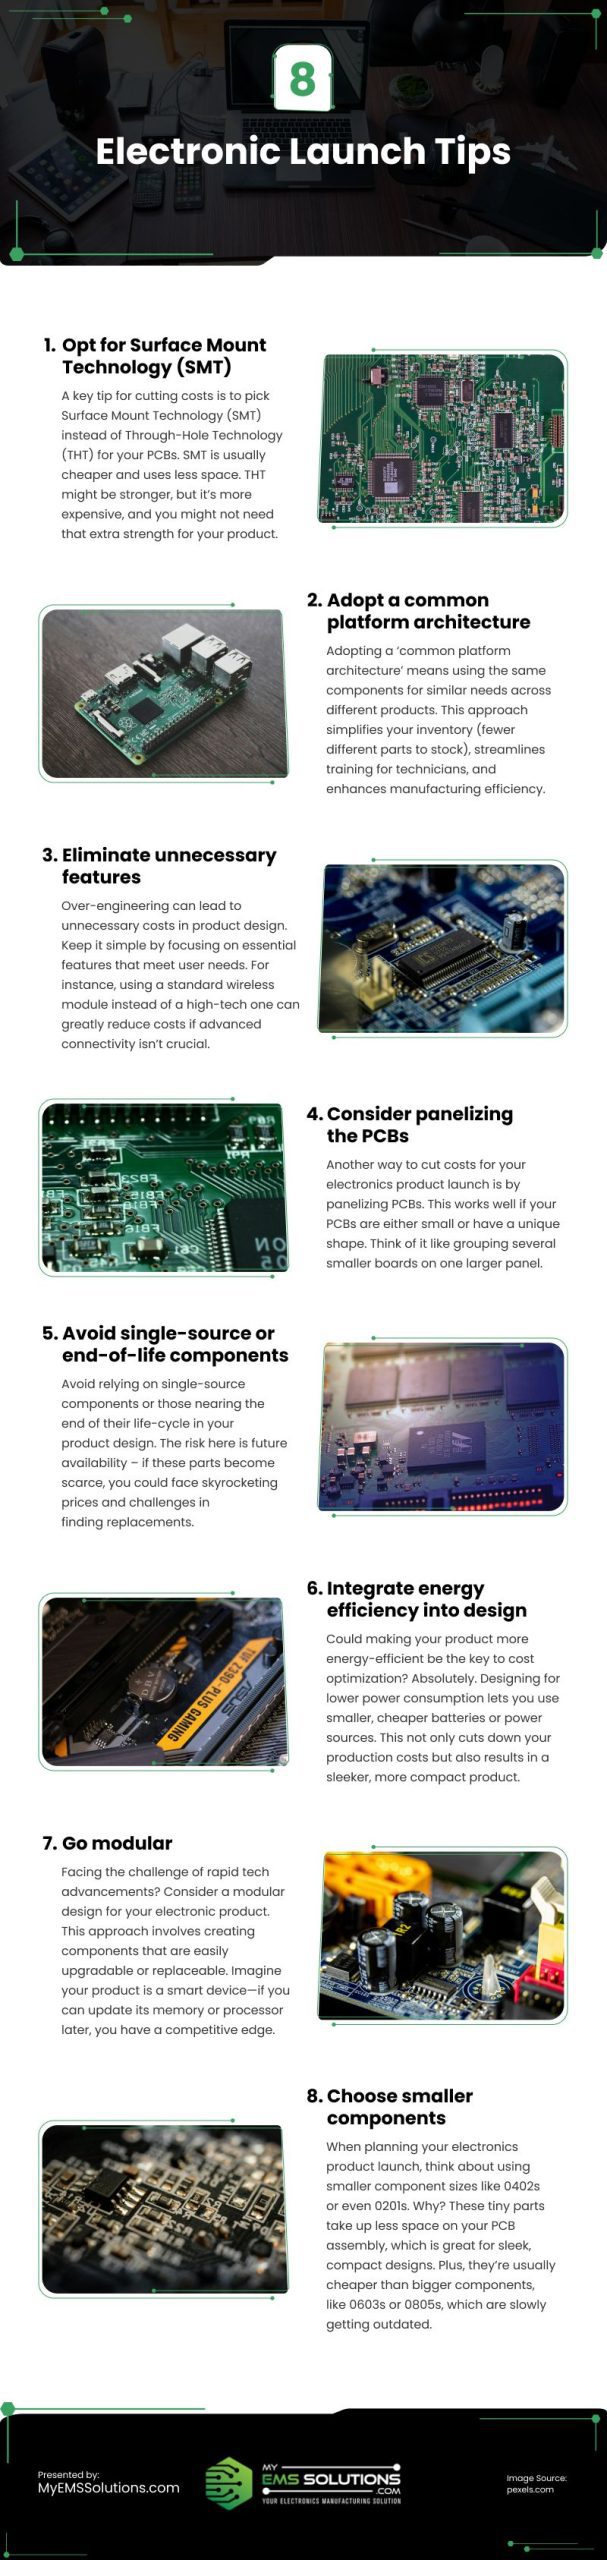 8 Electronic Launch Tips Infographic